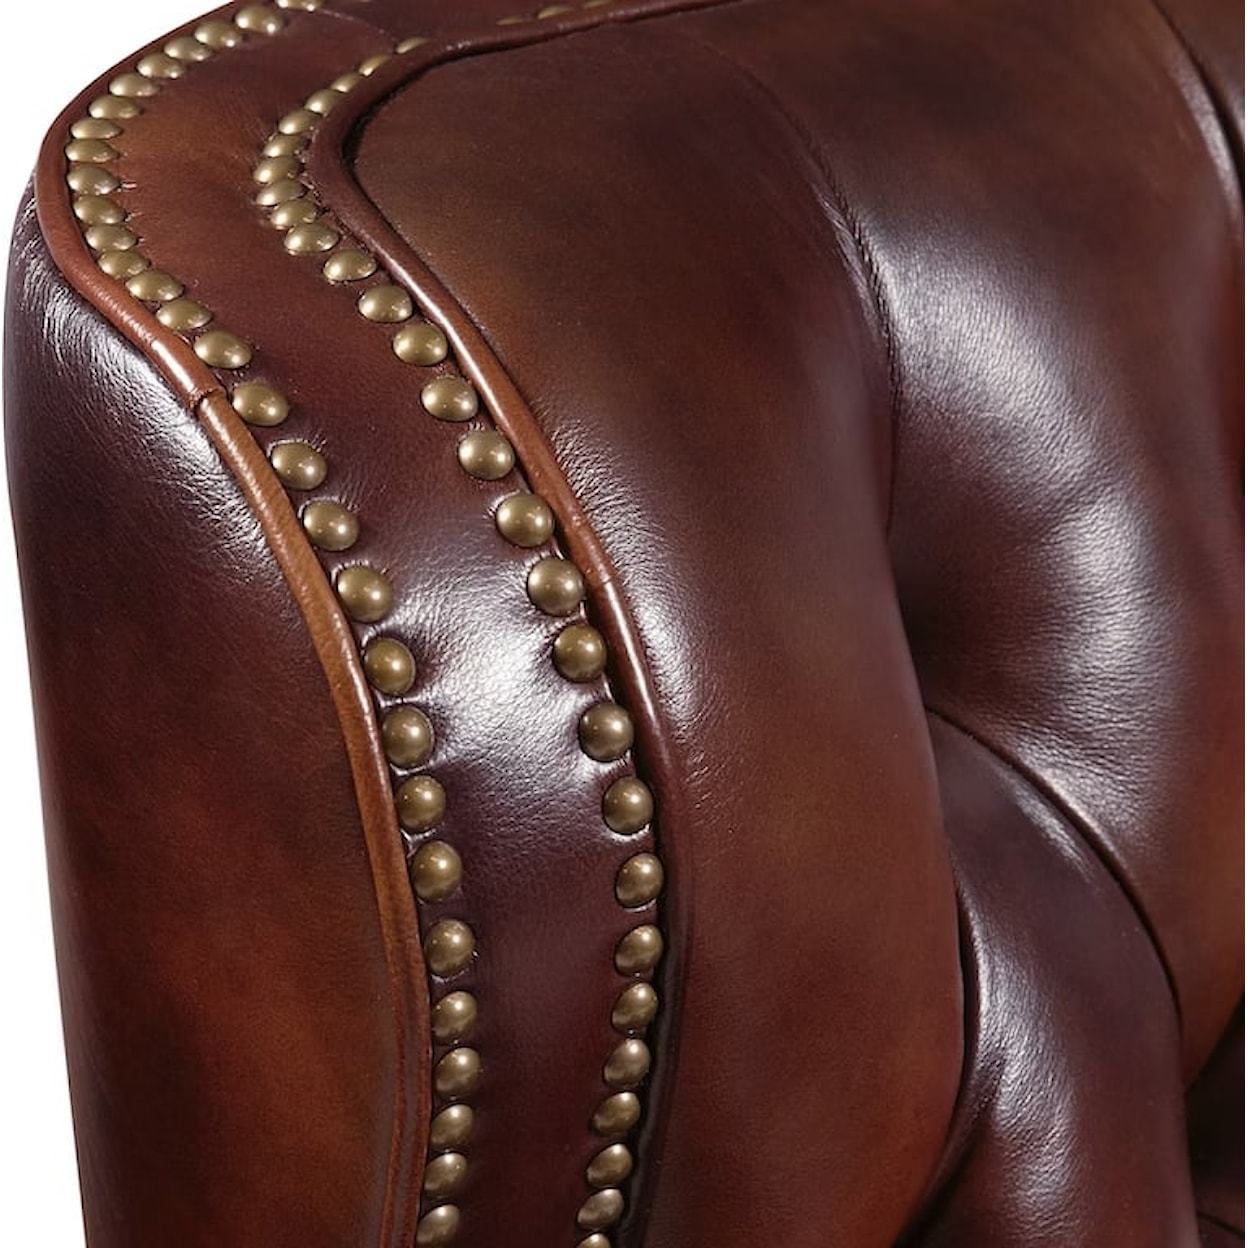 Prime Resources International Sevilla Leather Wingback Recliner